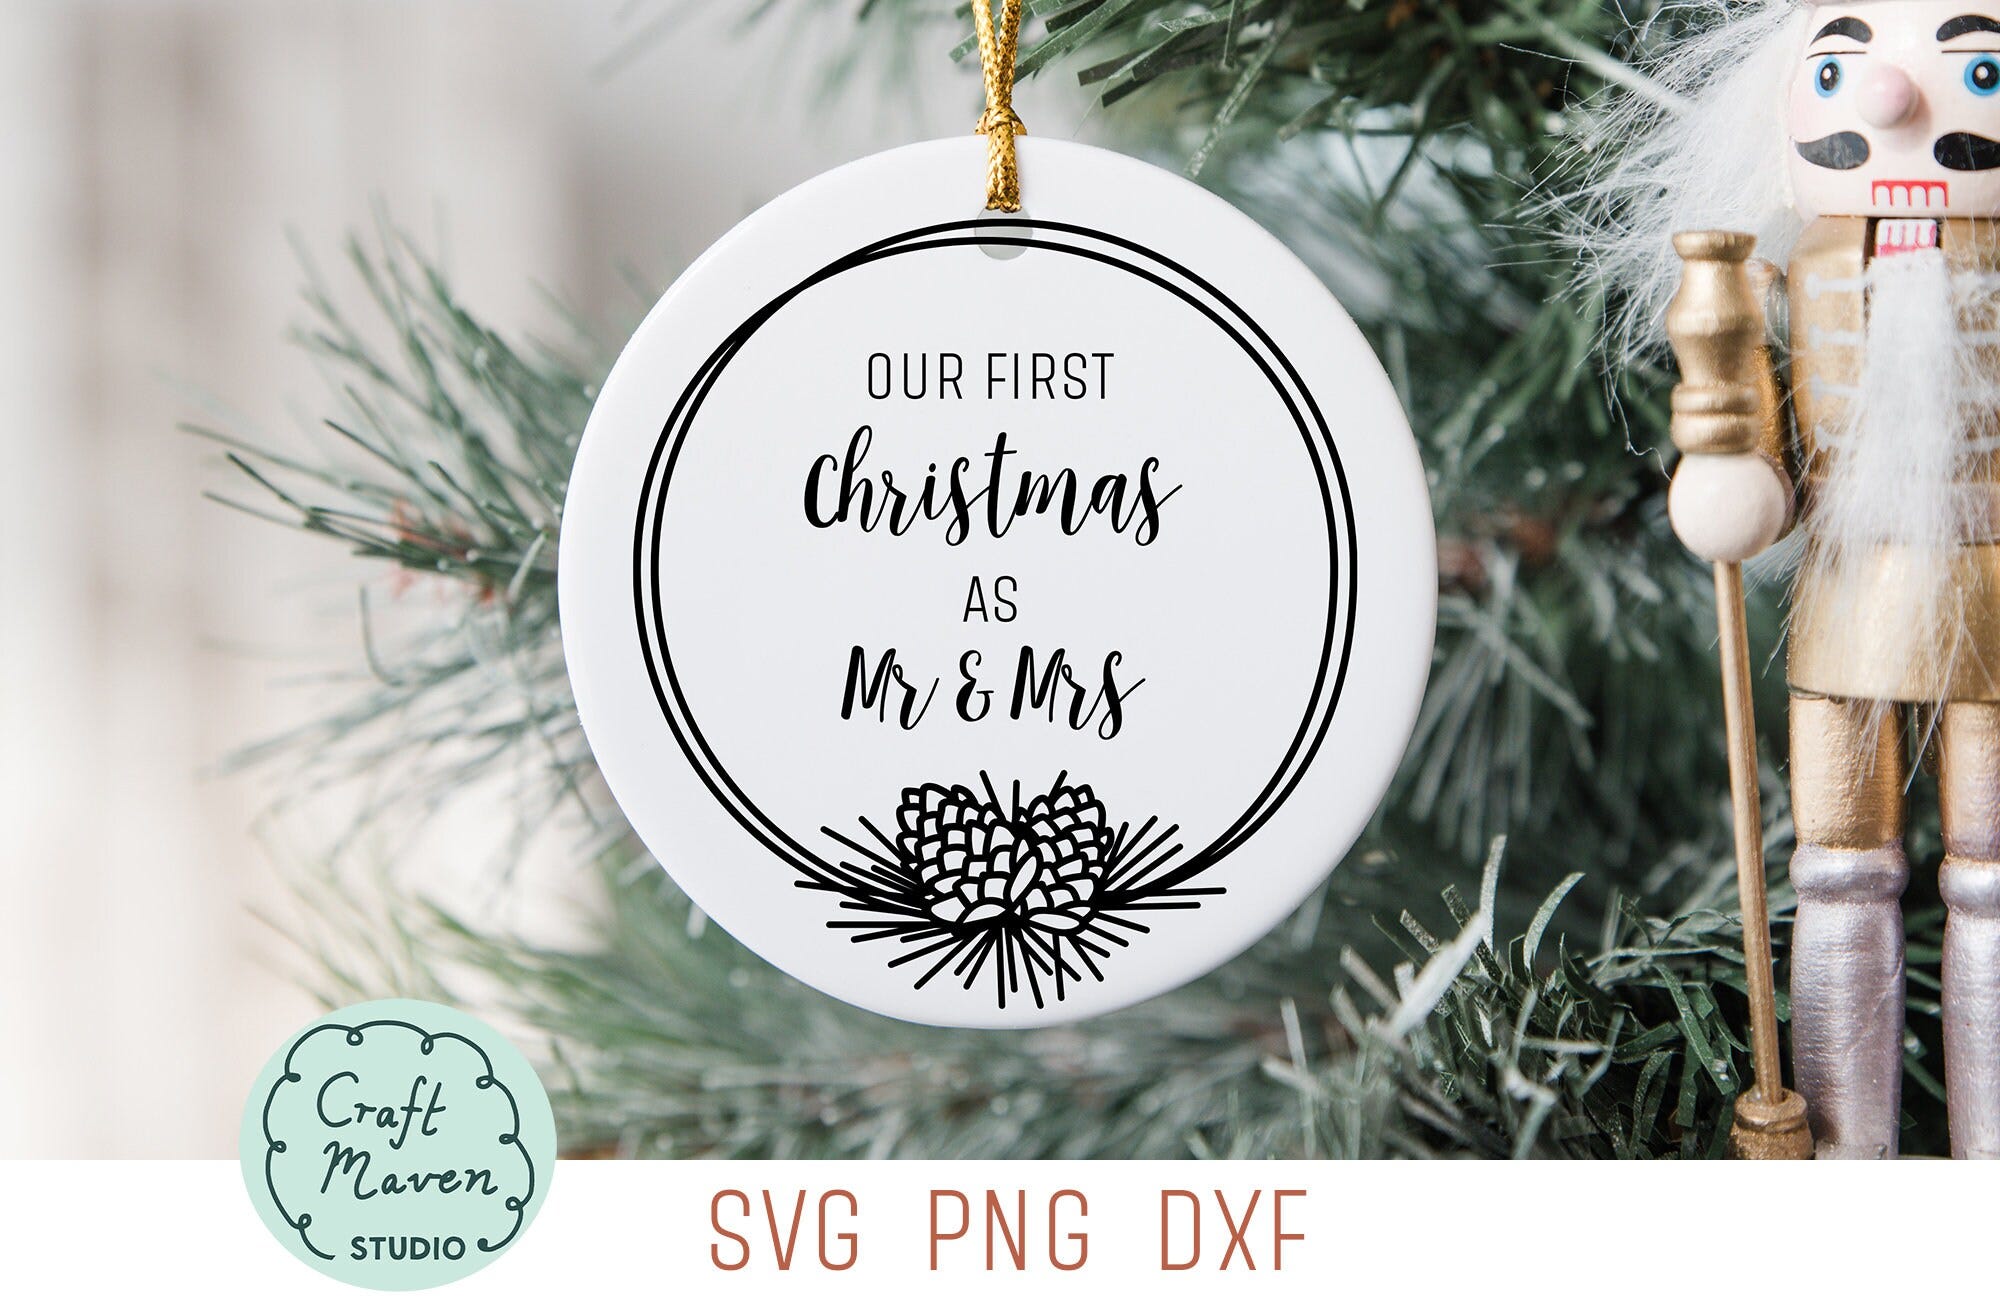 Our first Christmas as Mr and Mrs SVG, Just Married SVG, Christmas Ornament SVG, Xmas Decoration Svg, Christmas Wreath Svg, His and hers svg